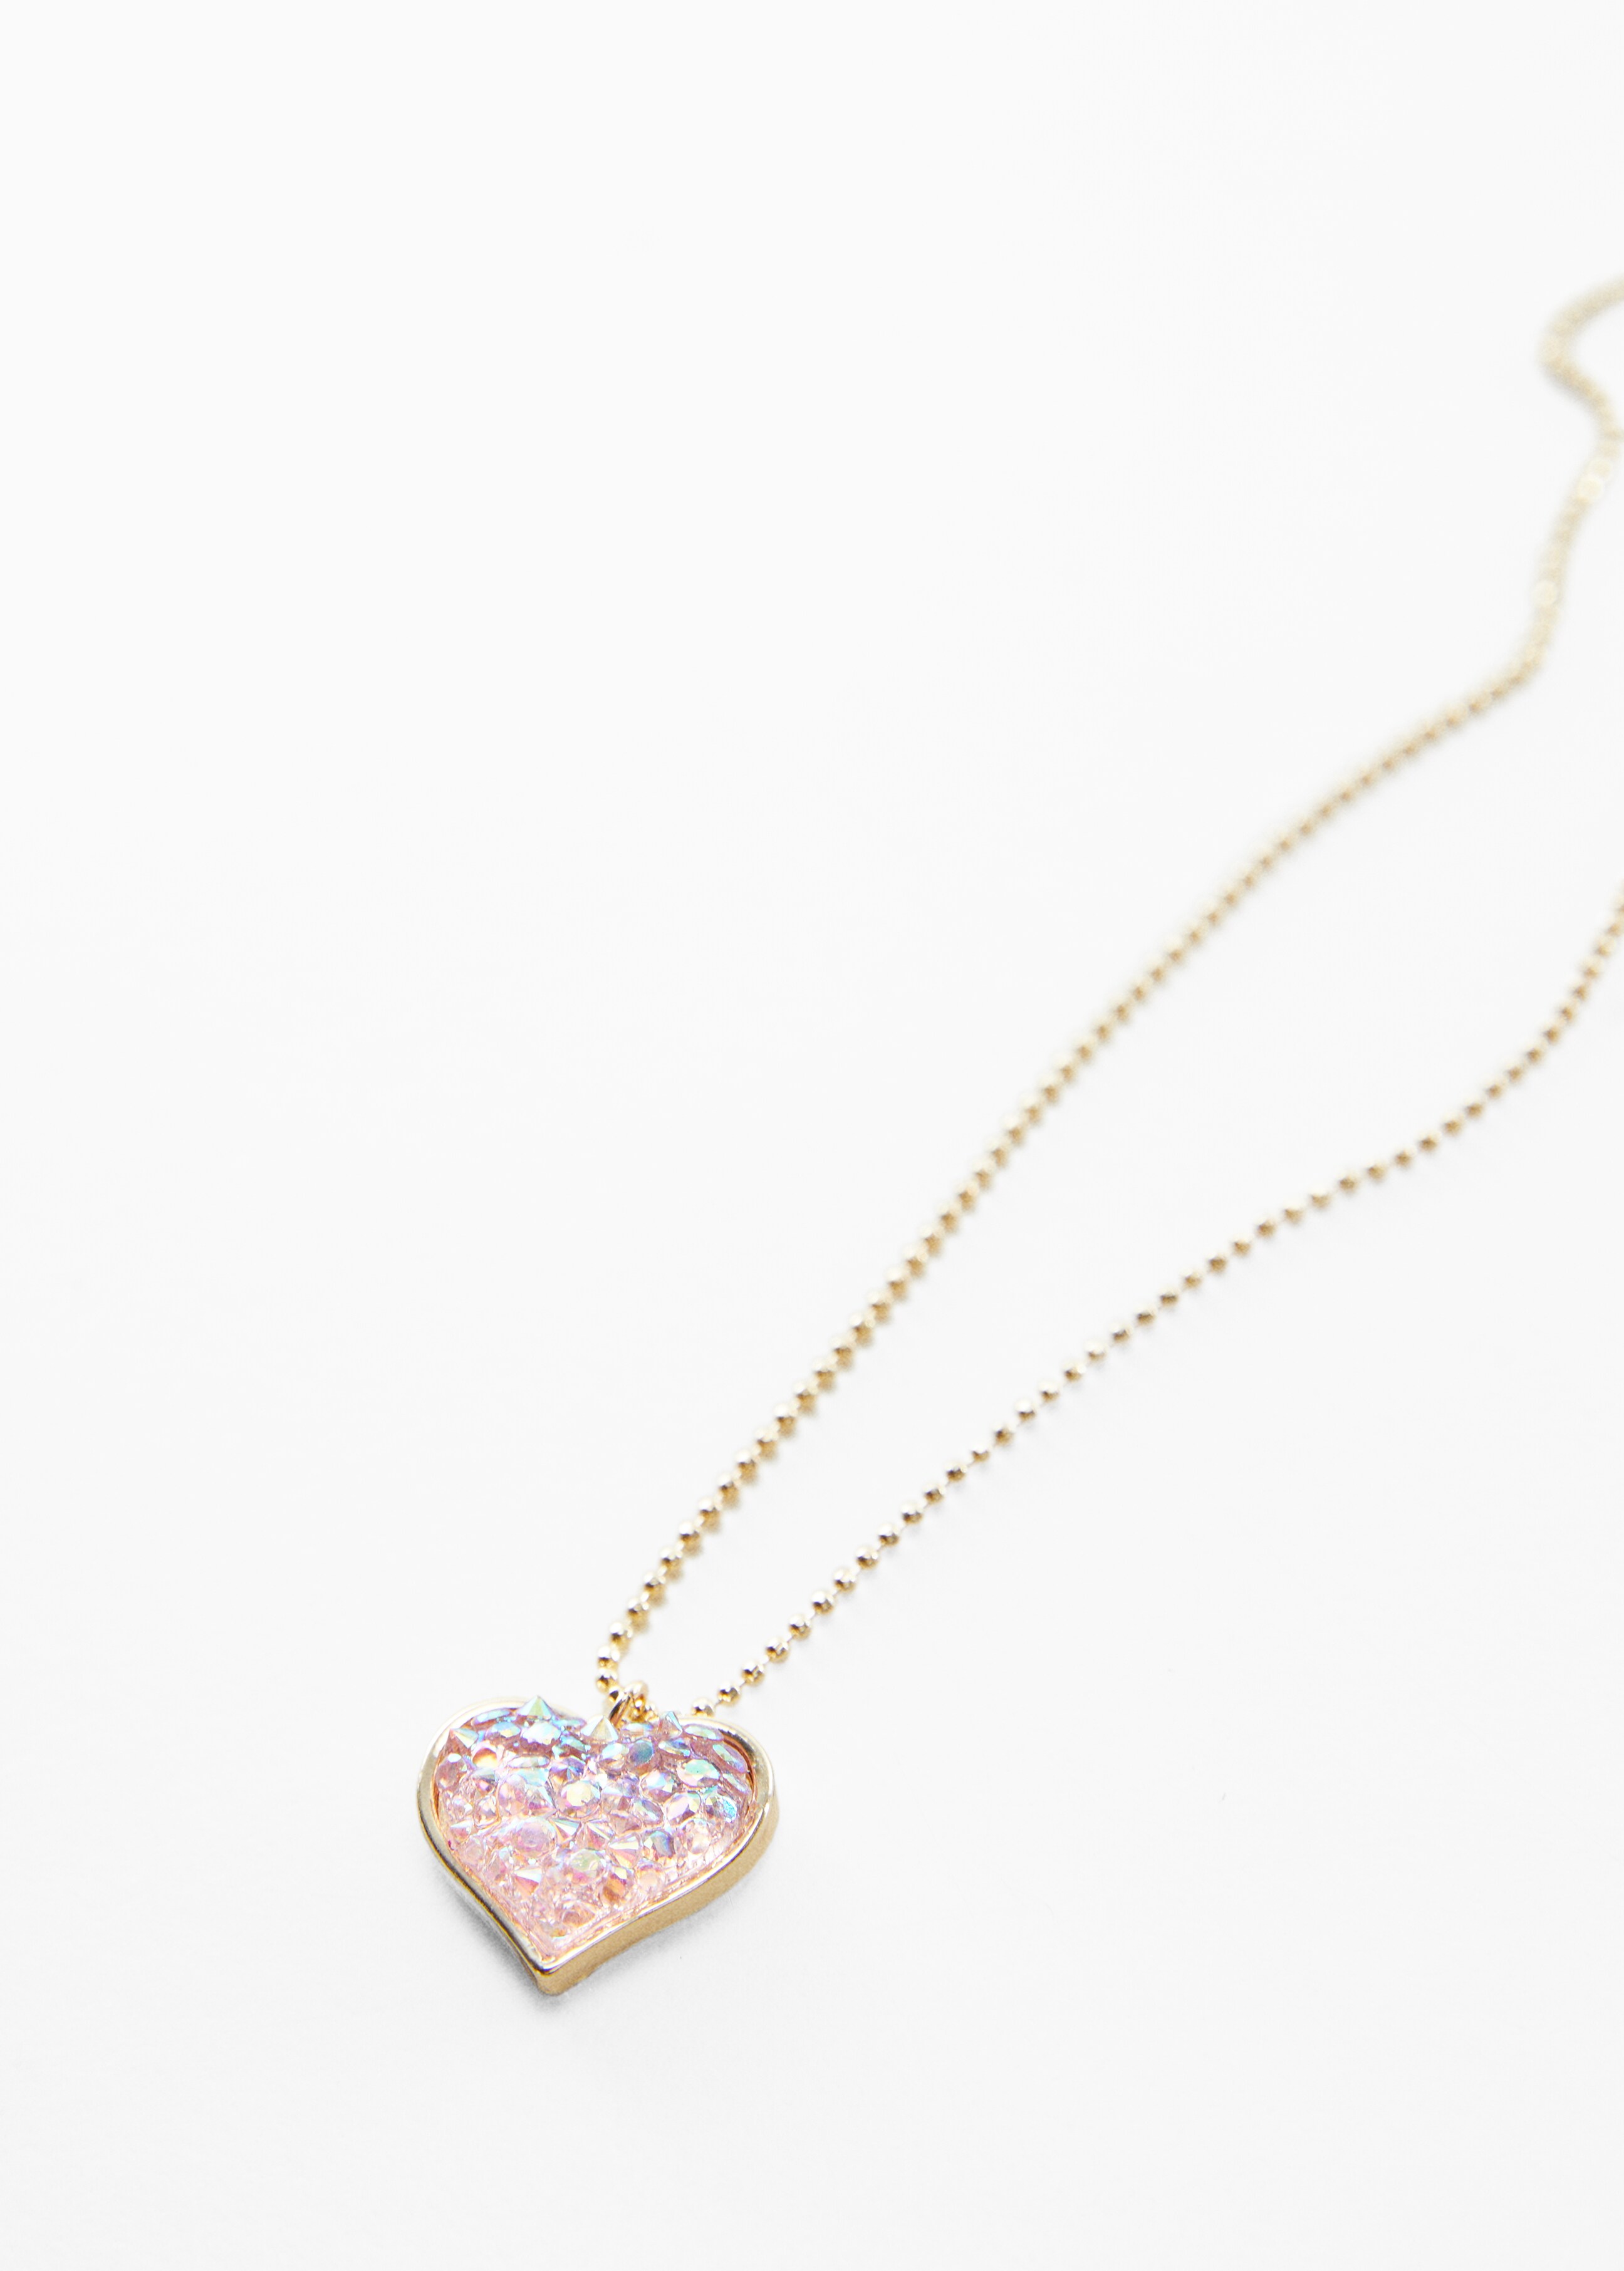 Best friends necklace - Details of the article 1